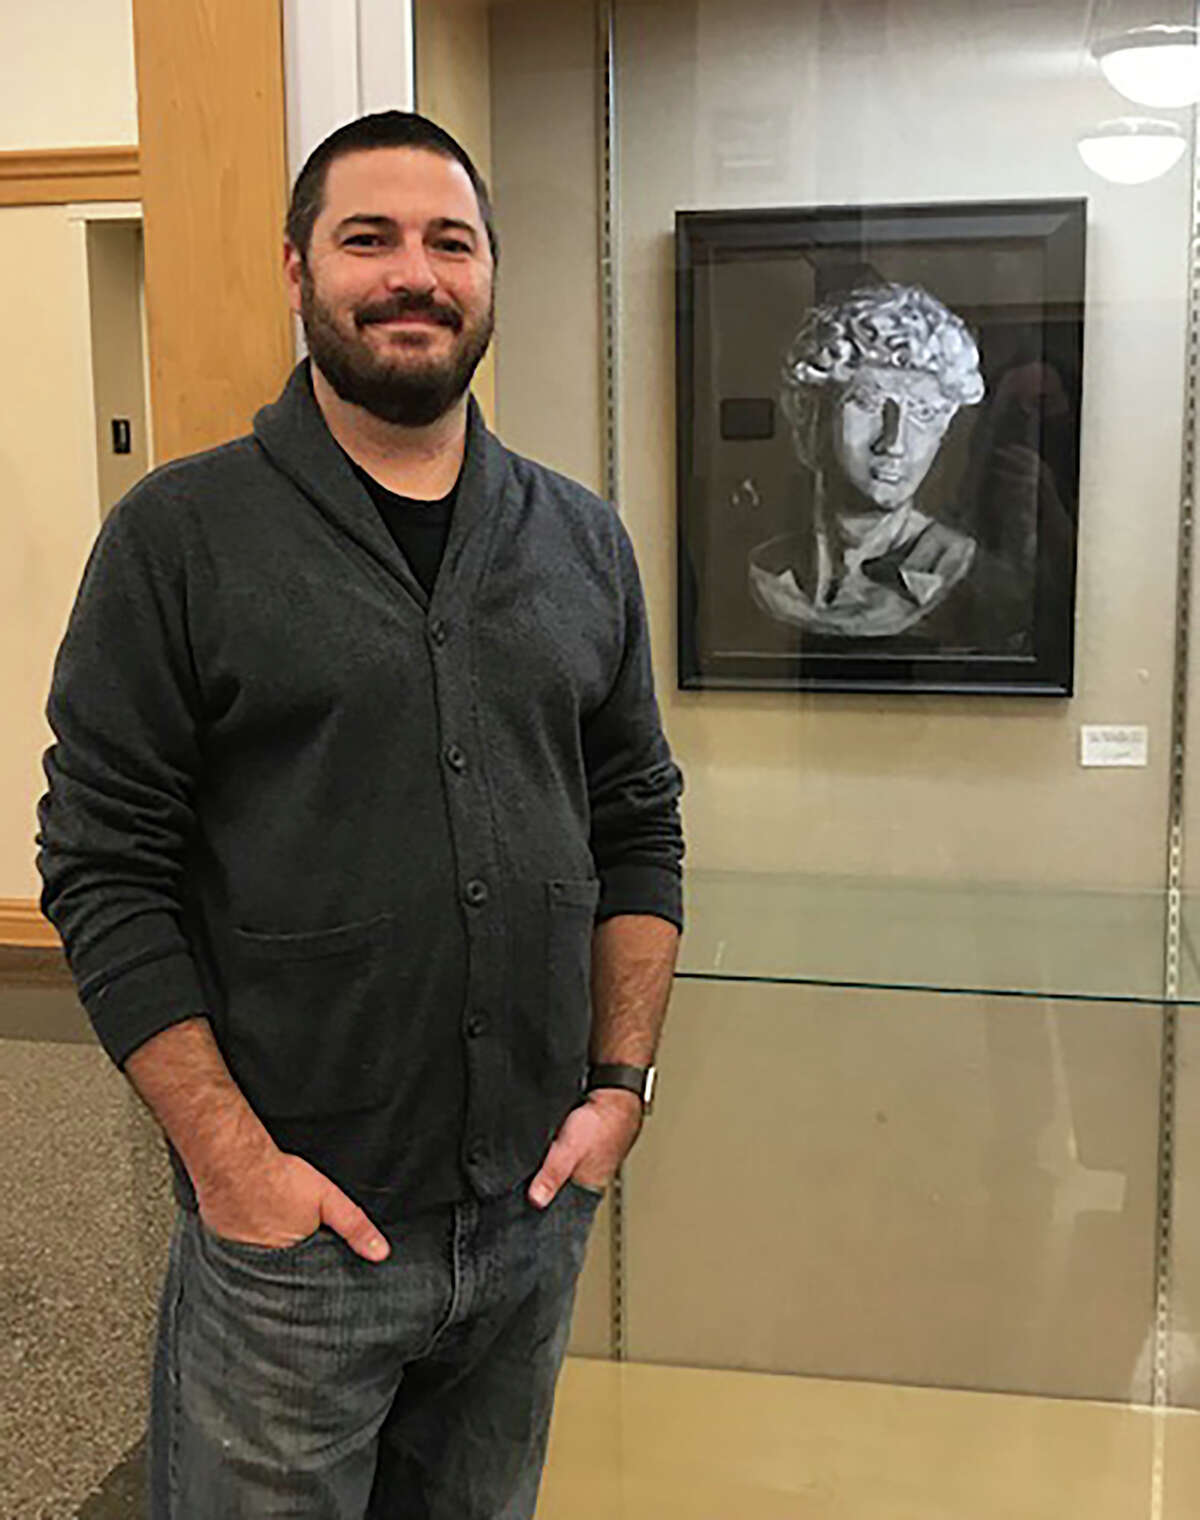 Quincy artist John Steinkamp will be displayed at John Wood Community College's gallery in Quincy. Steinkamp has a degree in graphic art but is a self-taught oil painter.